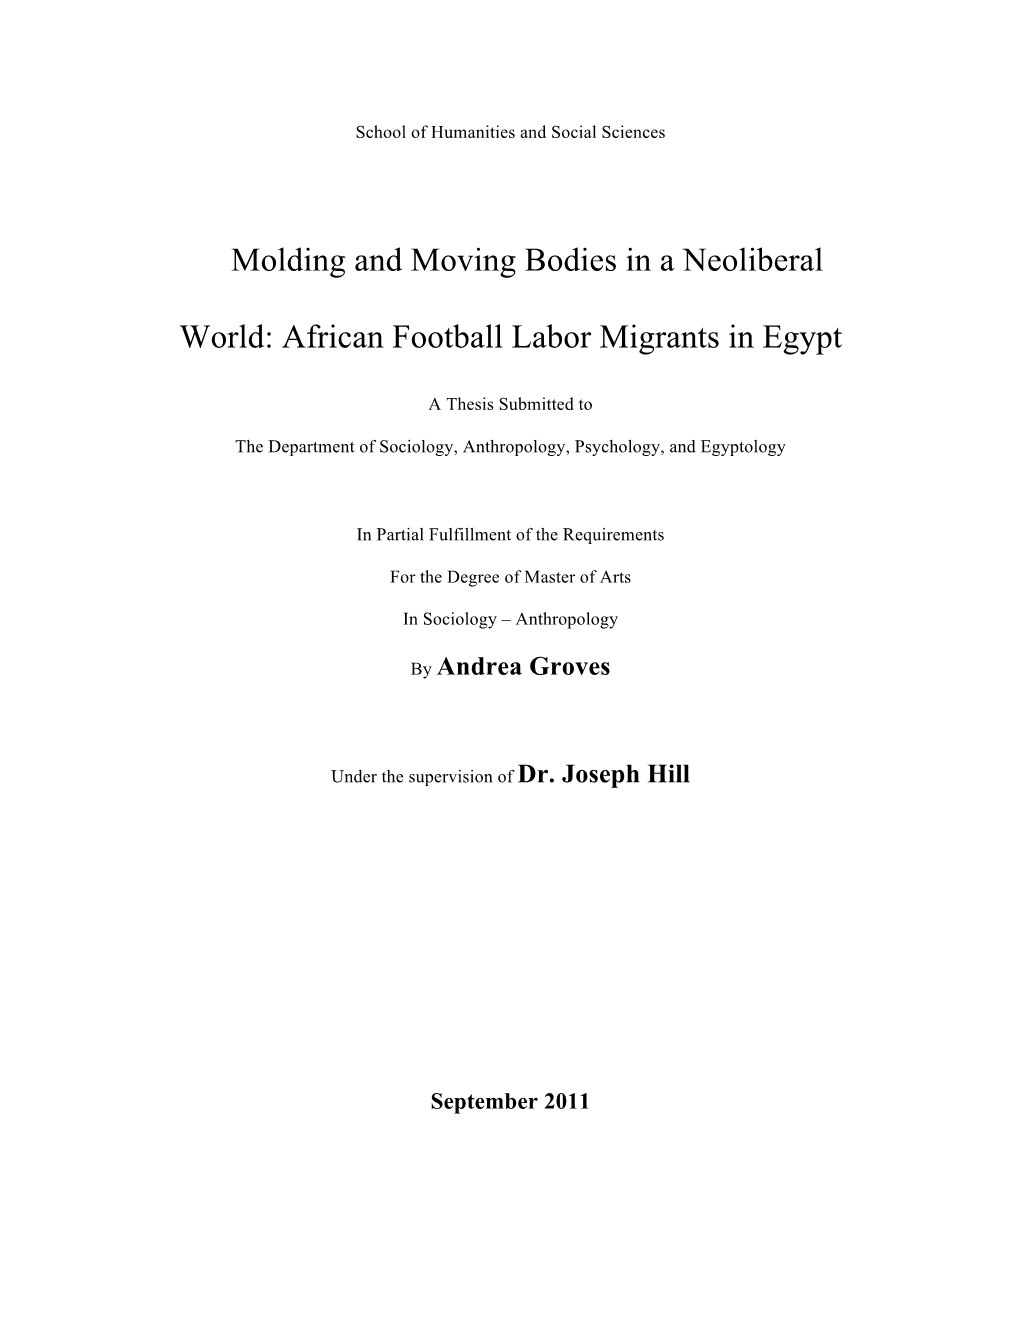 African Football Labor Migrants in Egypt